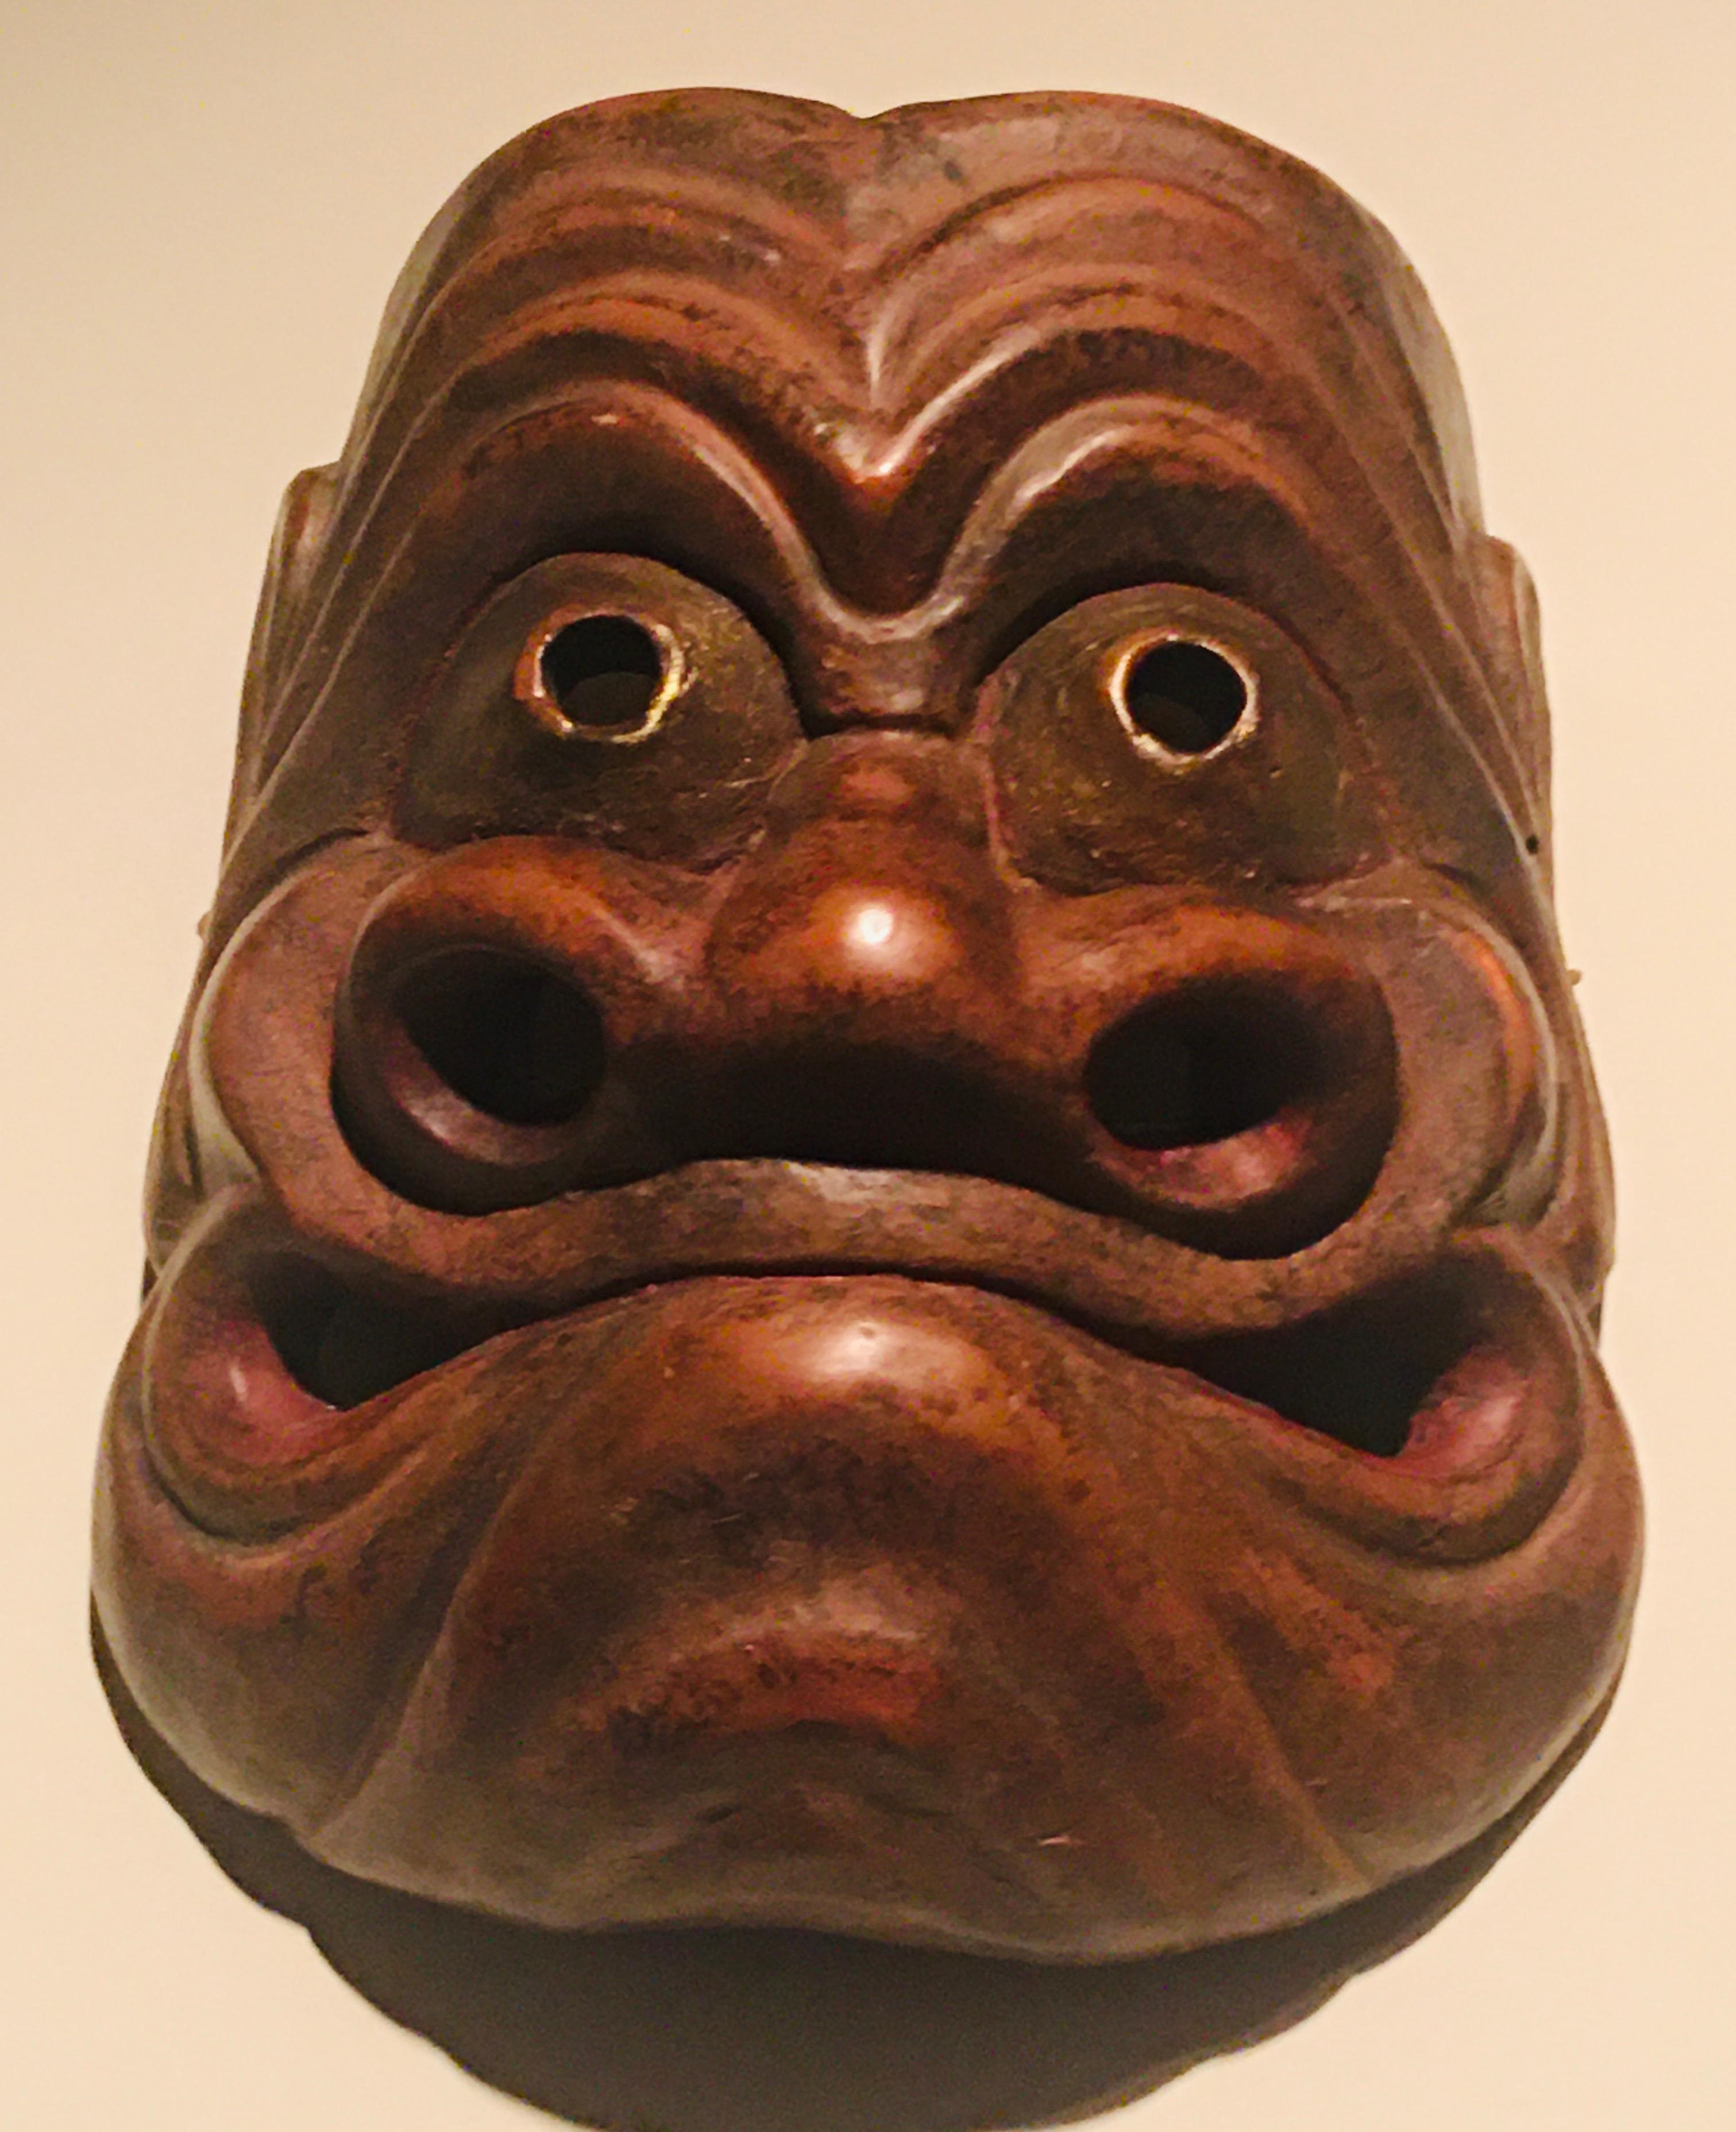 obeshimi mask meaning